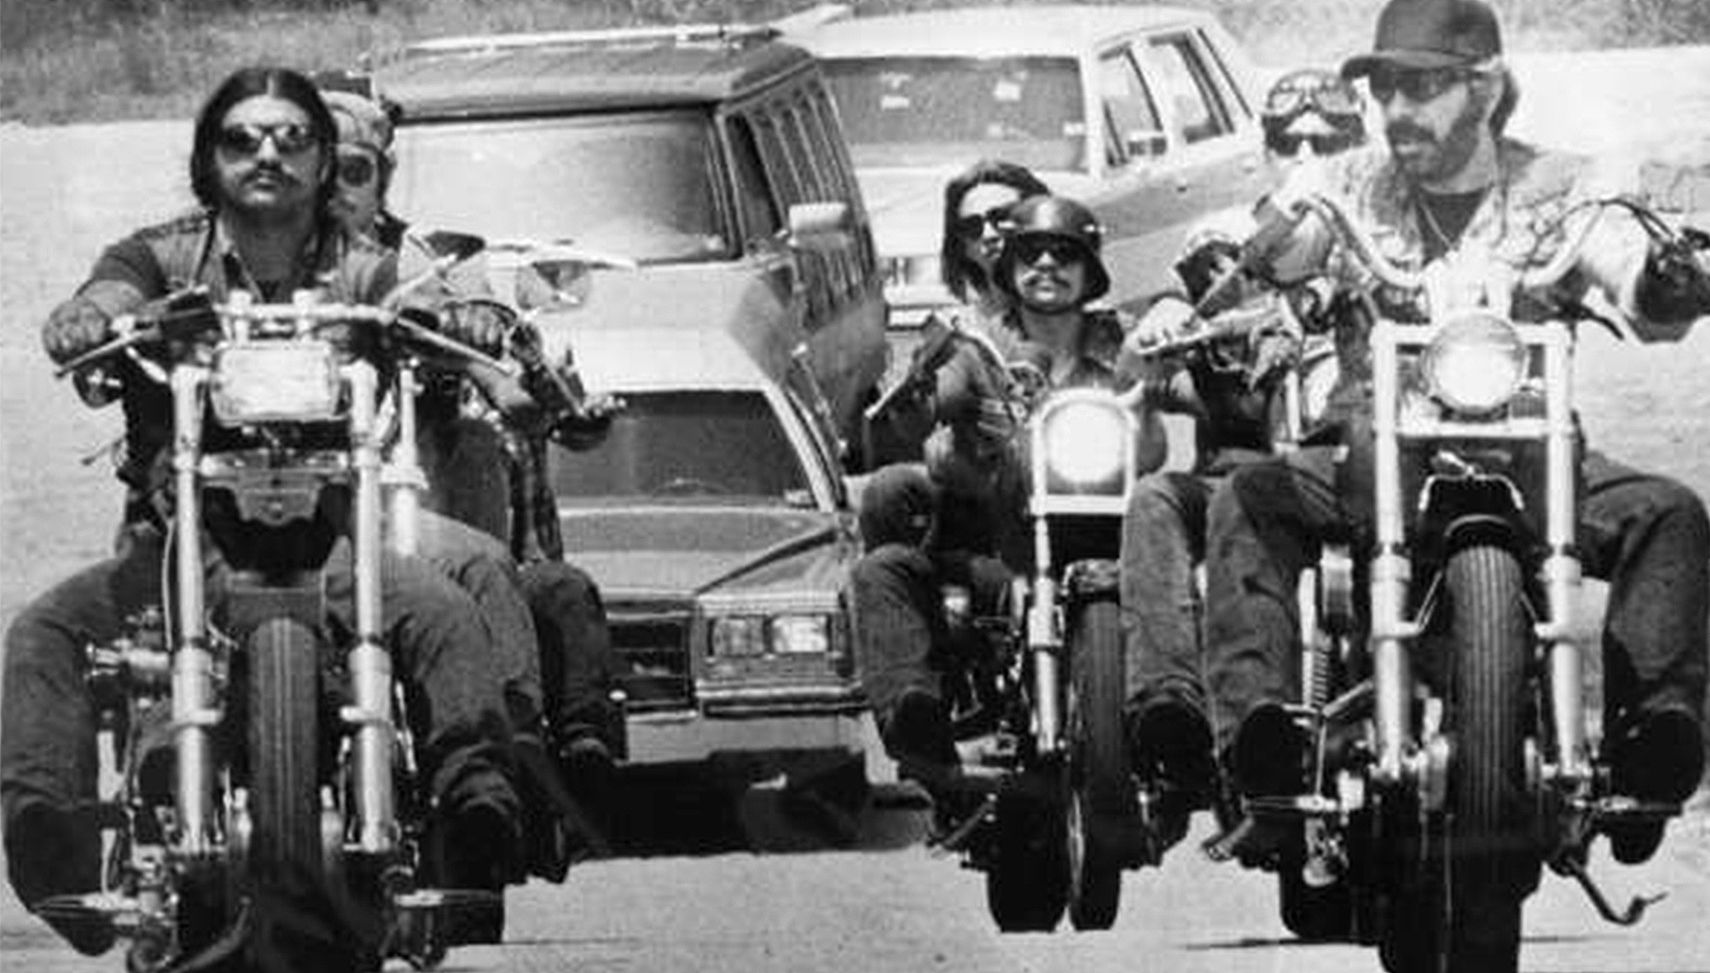 The Biggest Motorcycle Club Funeral Ever